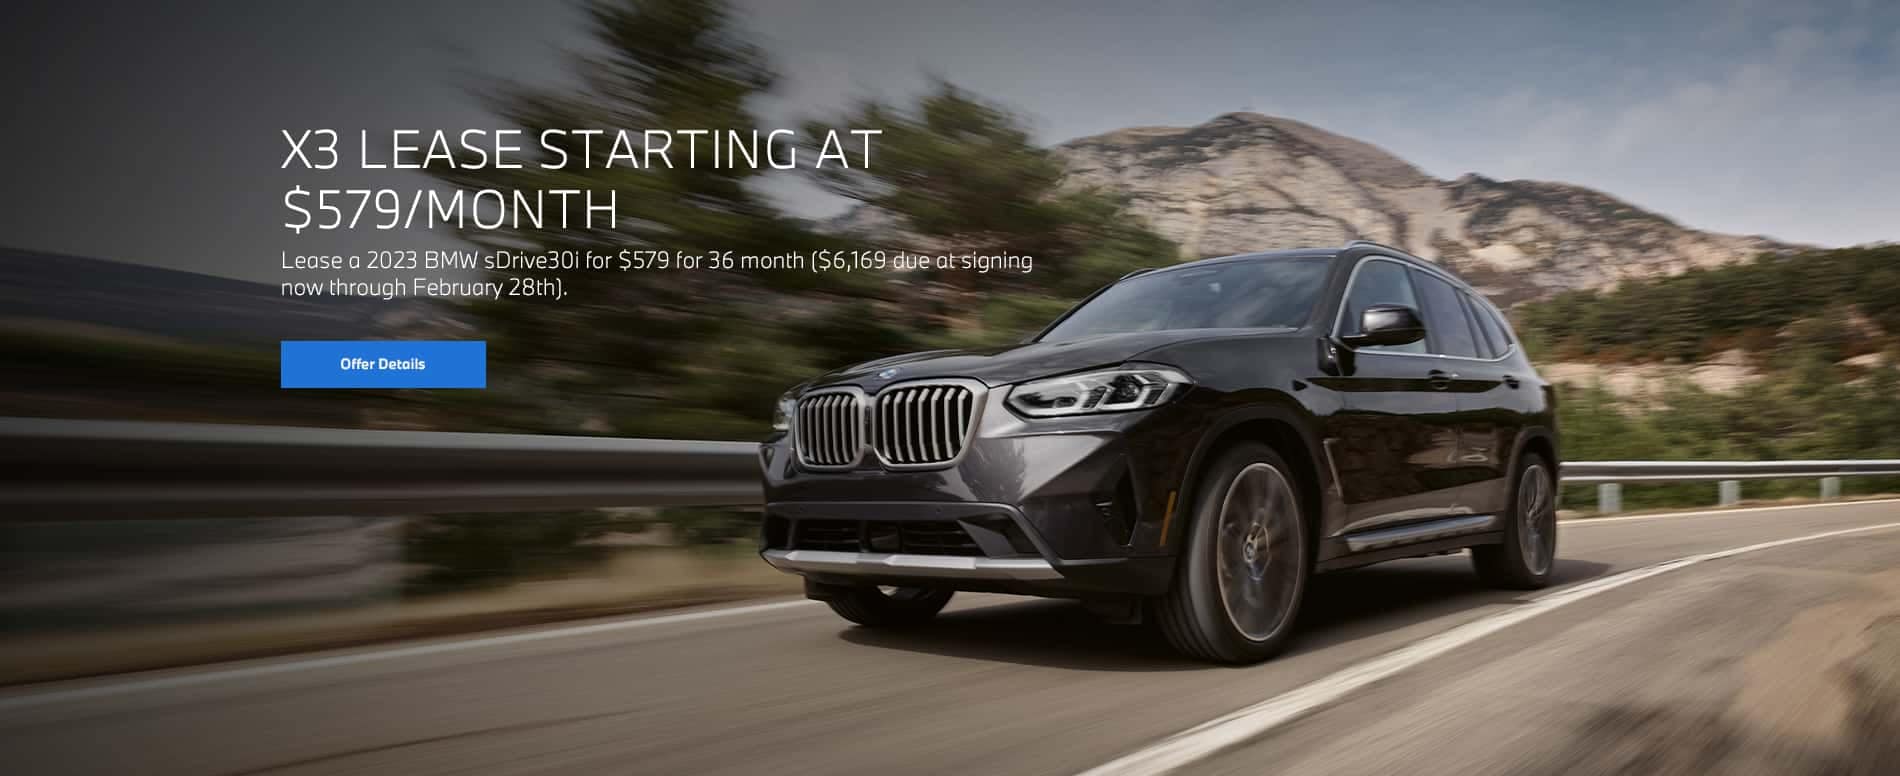 2023 X3 lease starting at $579 per month for 36 months